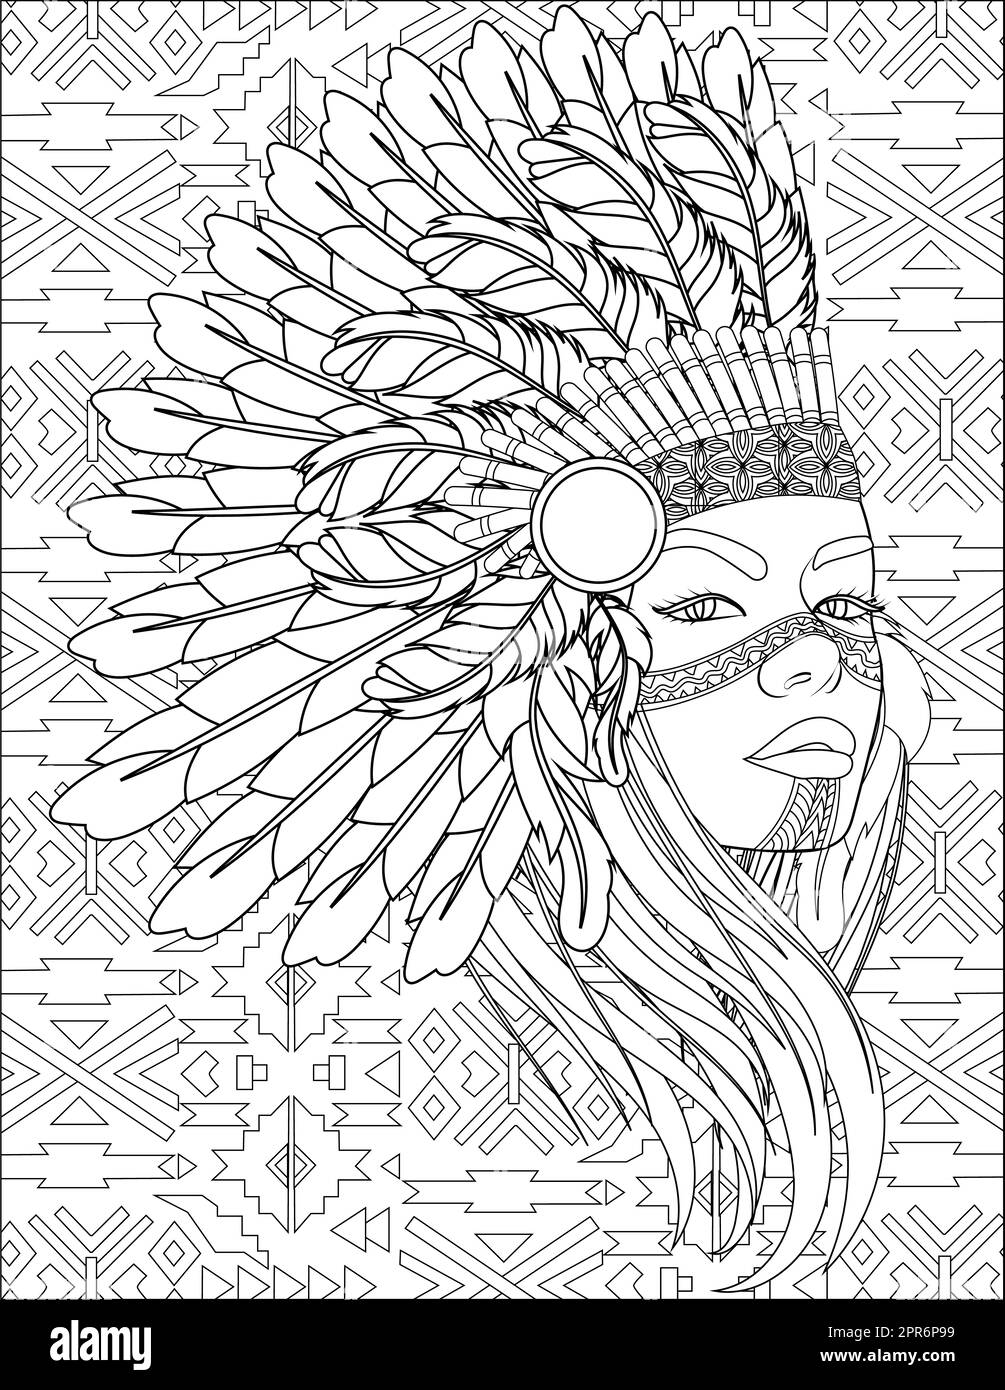 Native Woman With Feathered Headdress Side Looking Colorless Line Drawing. Stock Photo